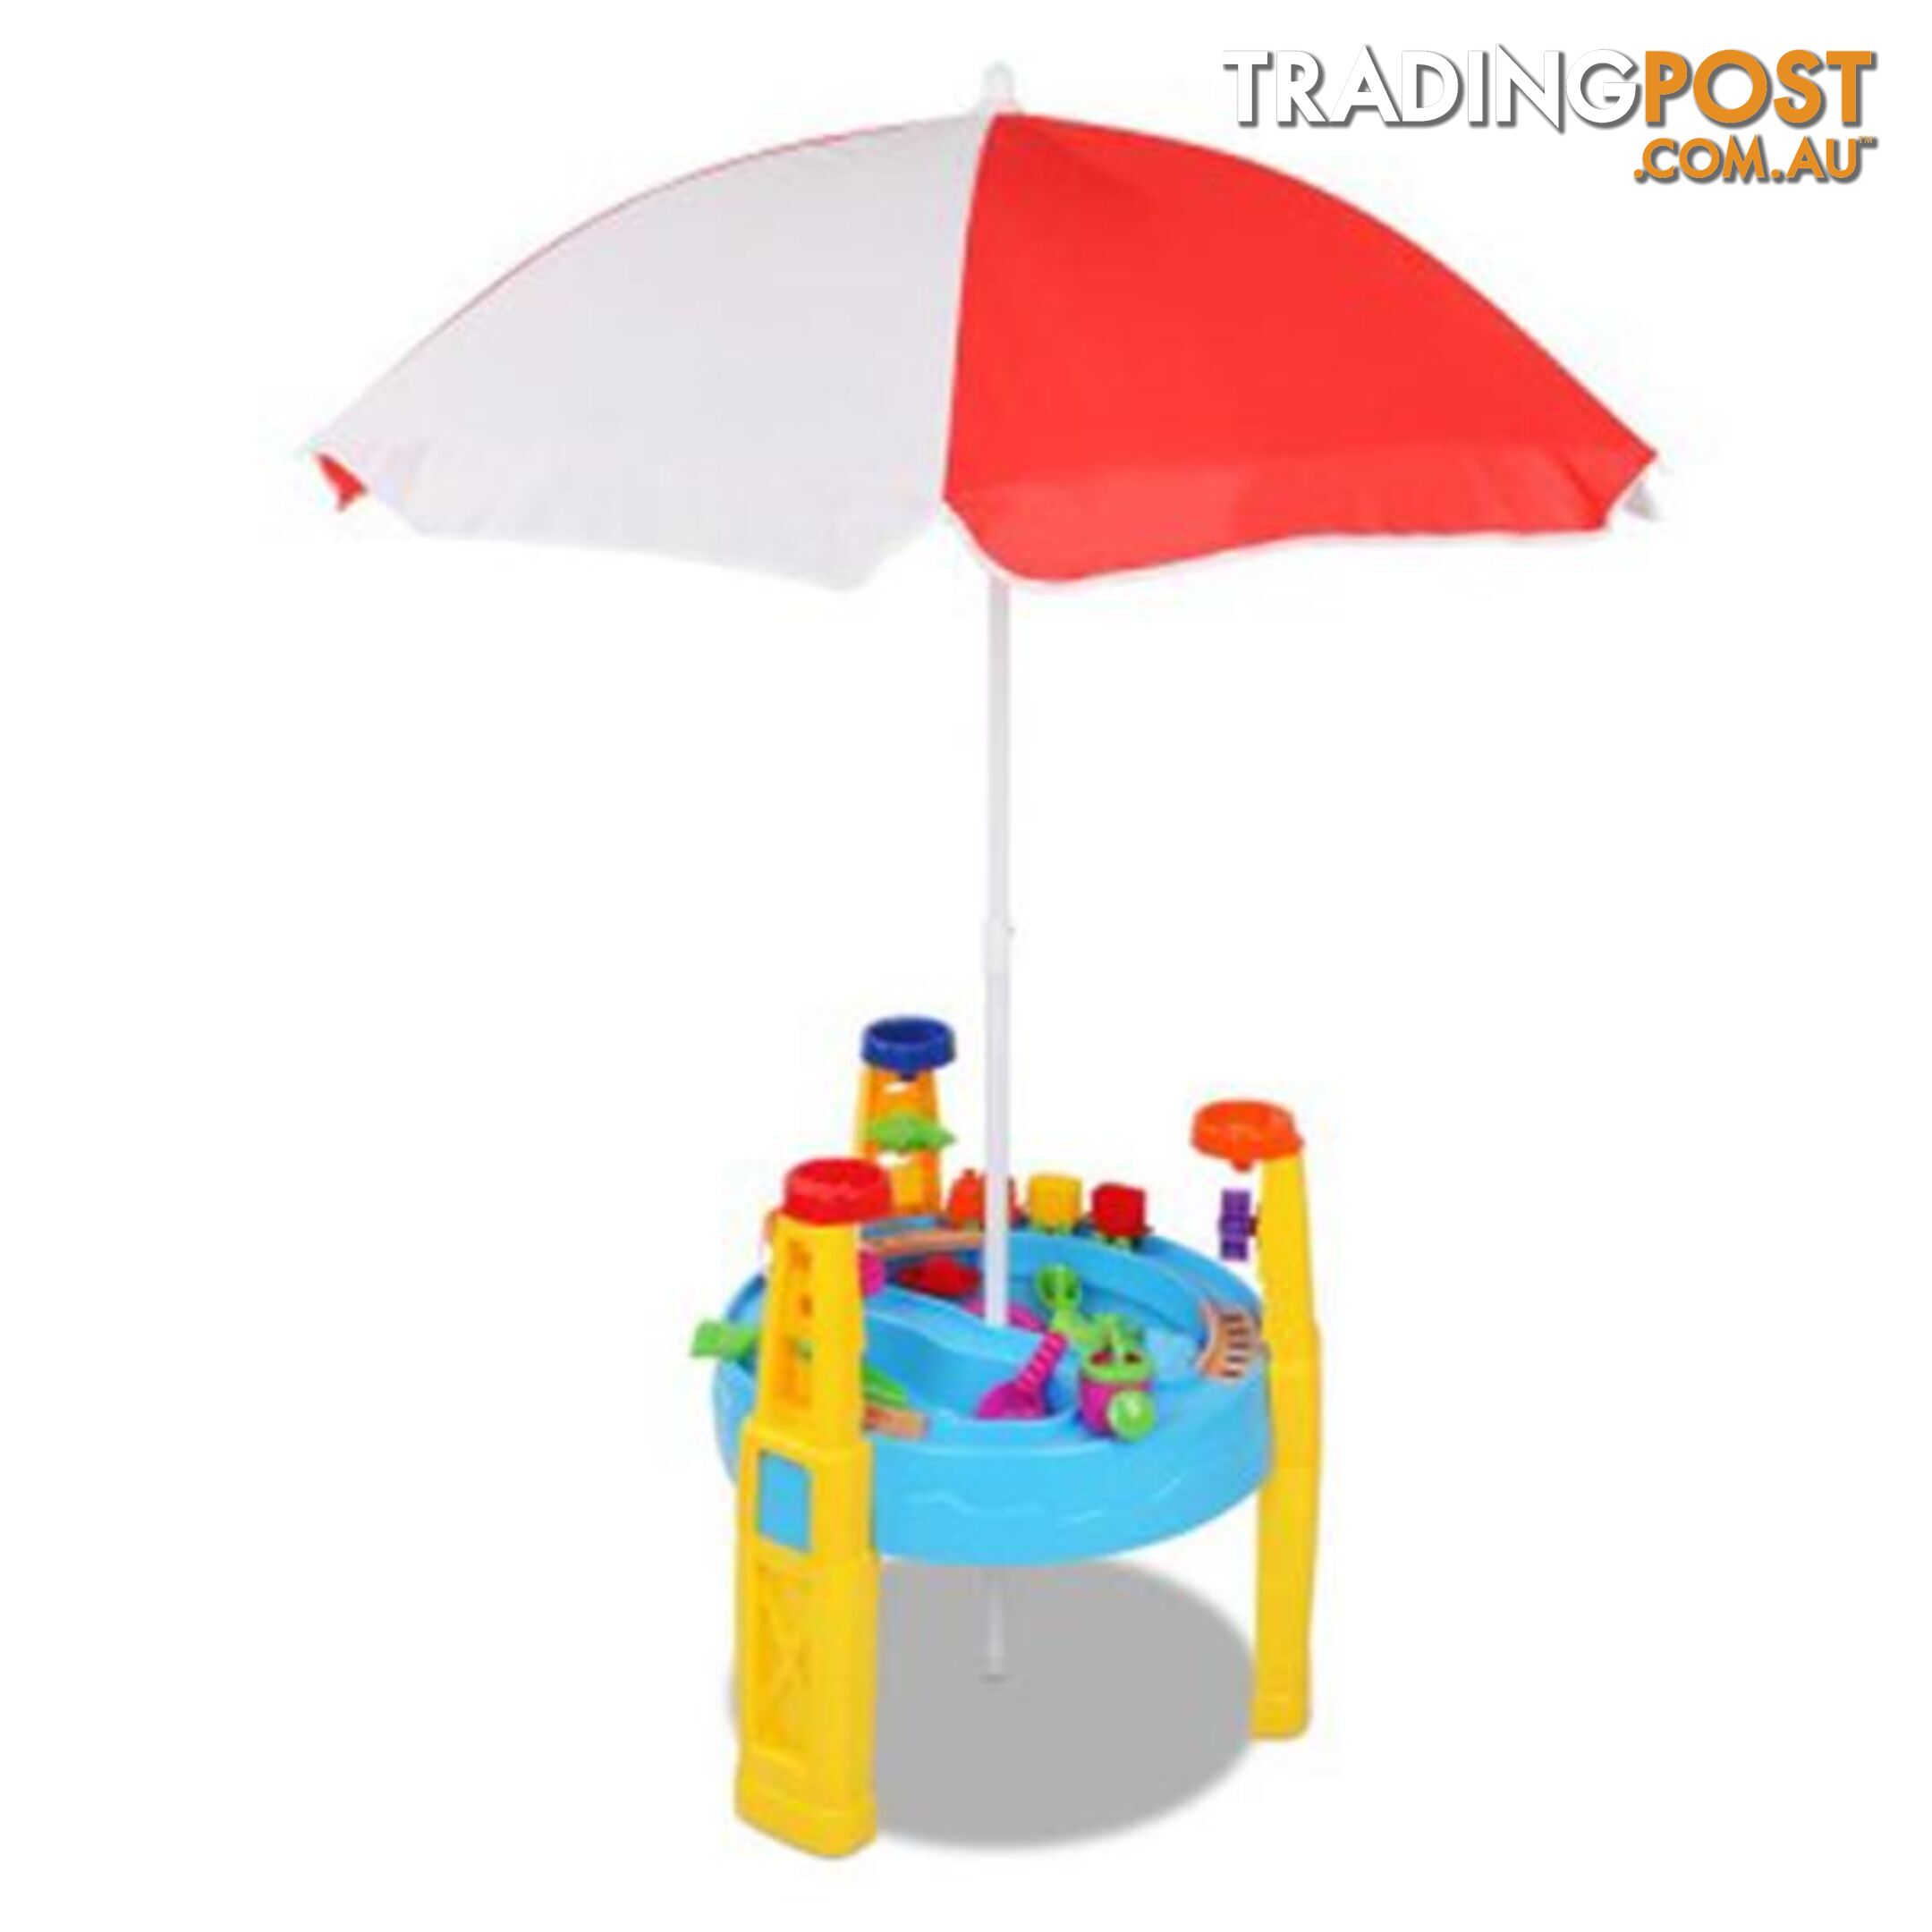 Kids Sand and Water Table Play Set with Umbrella - Keezi - 9350062117057